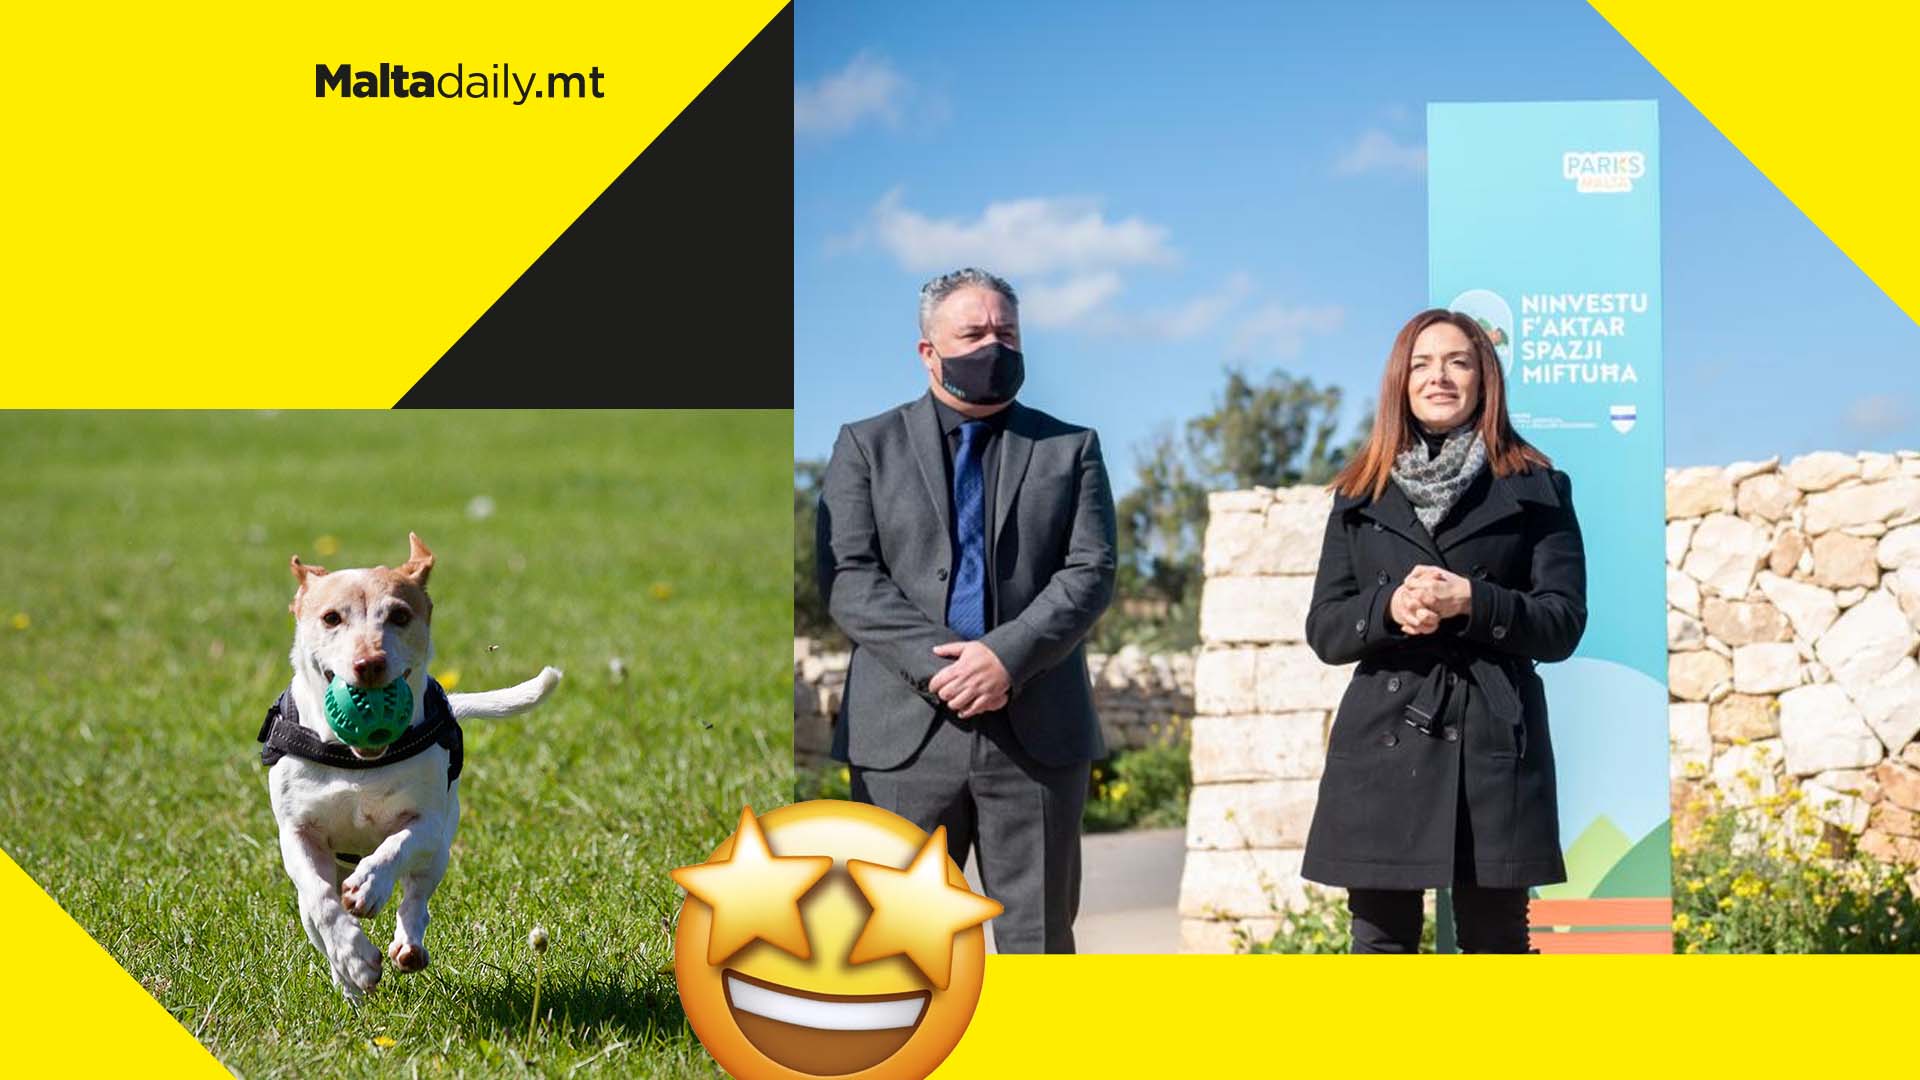 Ħal Safi open space regeneration will include brand new picnic area and dog park